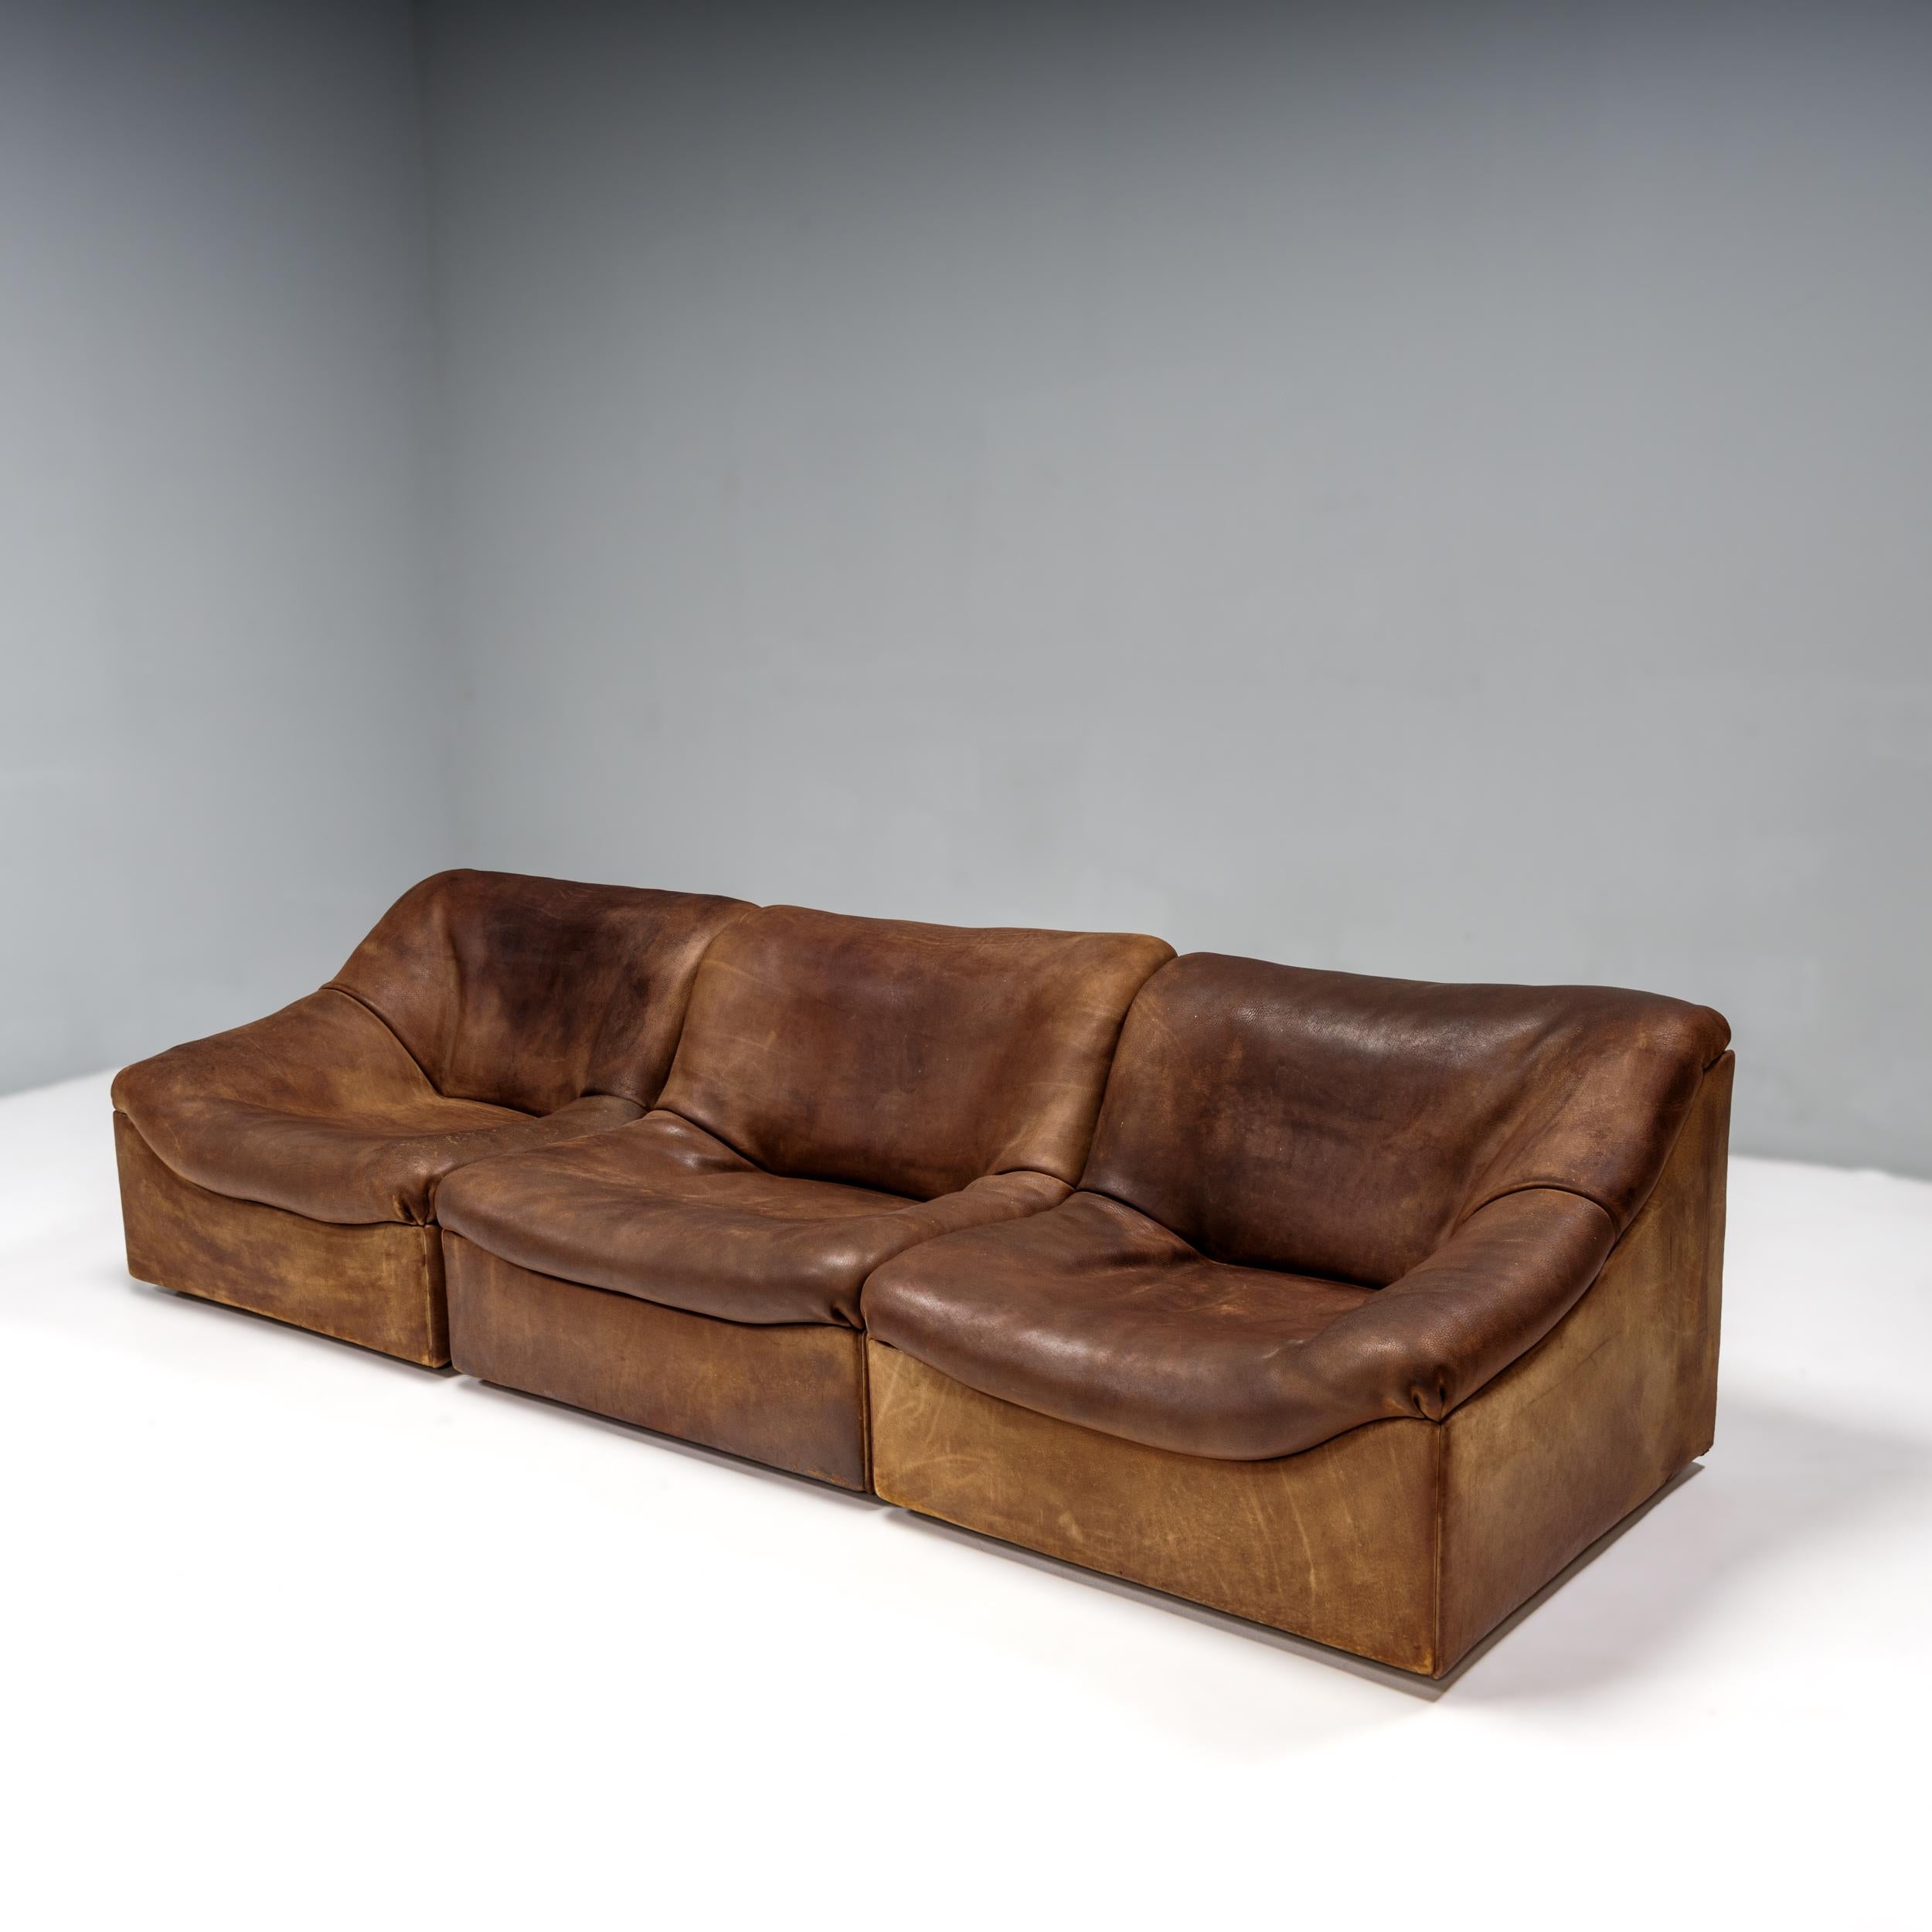 An iconic 1970s design, the DS46 chairs by De Sede are perfect for creating a sectional sofa or used as separate lounge chairs for a multitude of seating options.

Upholstered in soft brown leather, the set consists of two armchairs and one single